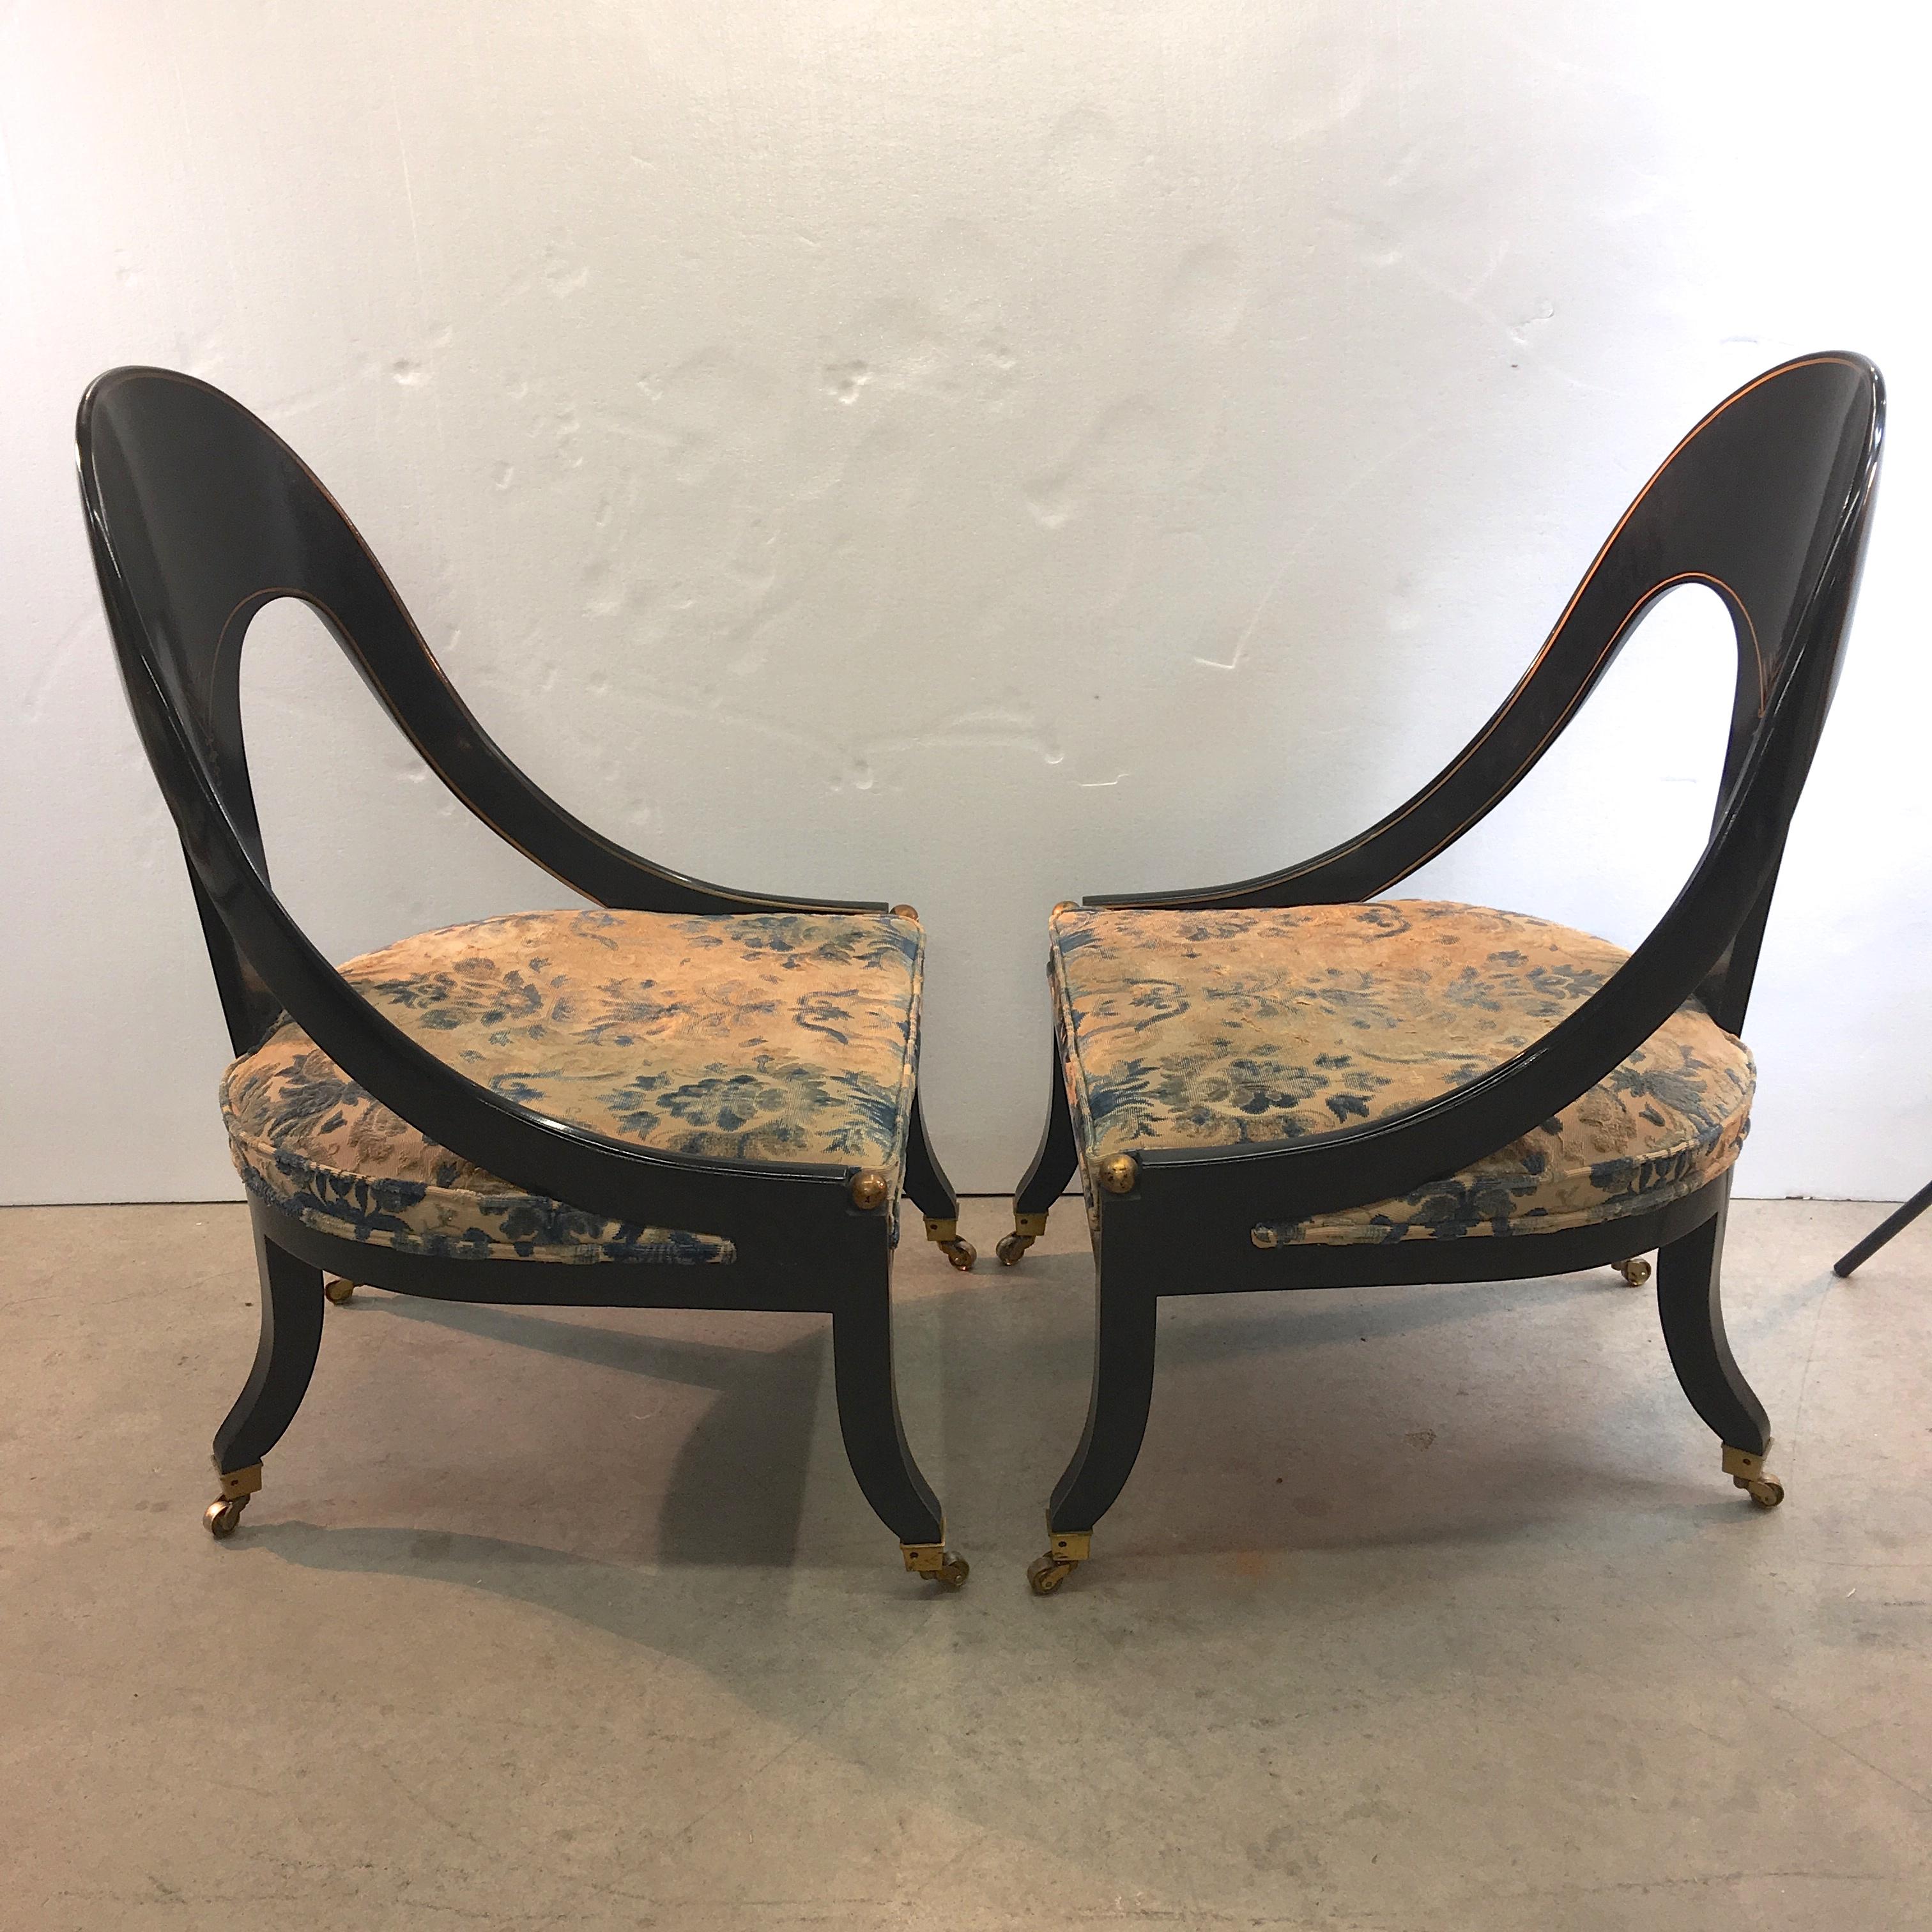 Lacquered Pair of English Classical Spoon Back Chairs